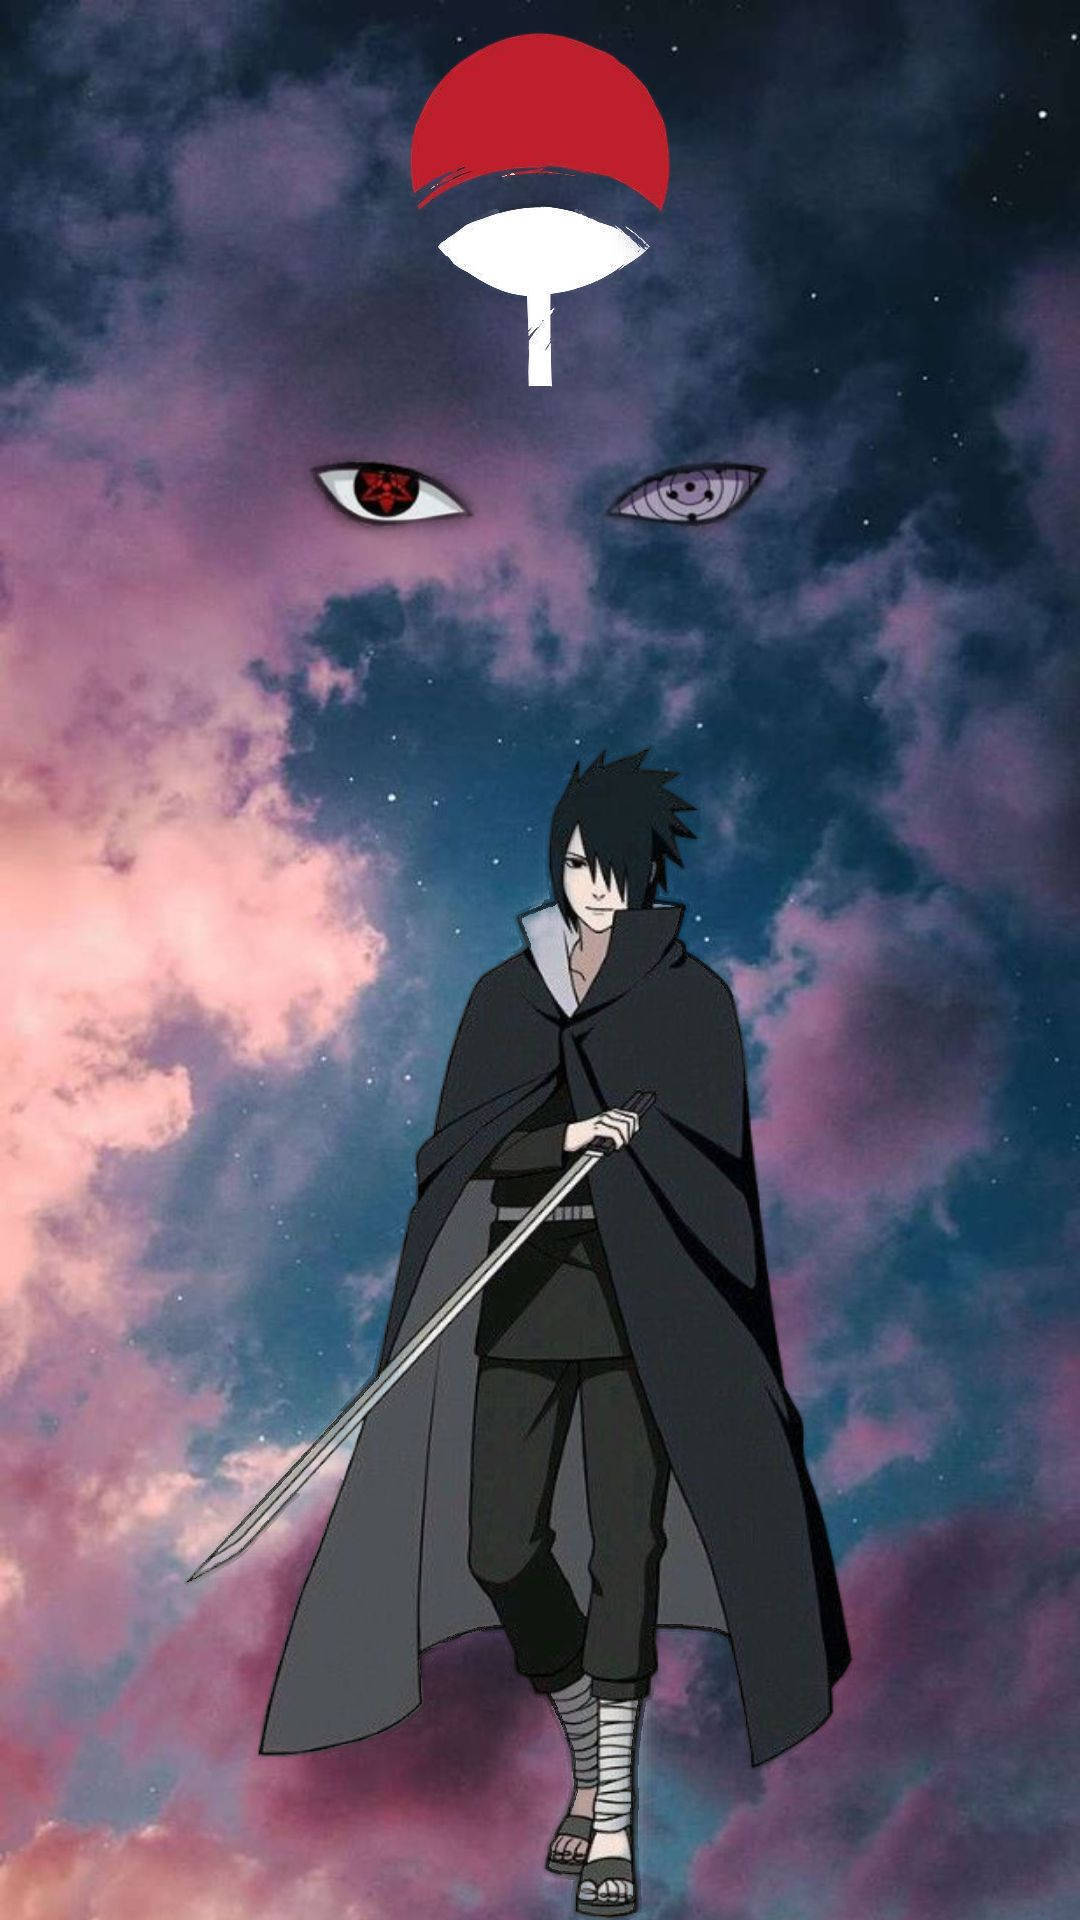 Naruto Wallpapers iPhone with high-resolution 1080x1920 pixel. You can use this wallpaper for your iPhone 5, 6, 7, 8, X, XS, XR backgrounds, Mobile Screensaver, or iPad Lock Screen - Sasuke Uchiha